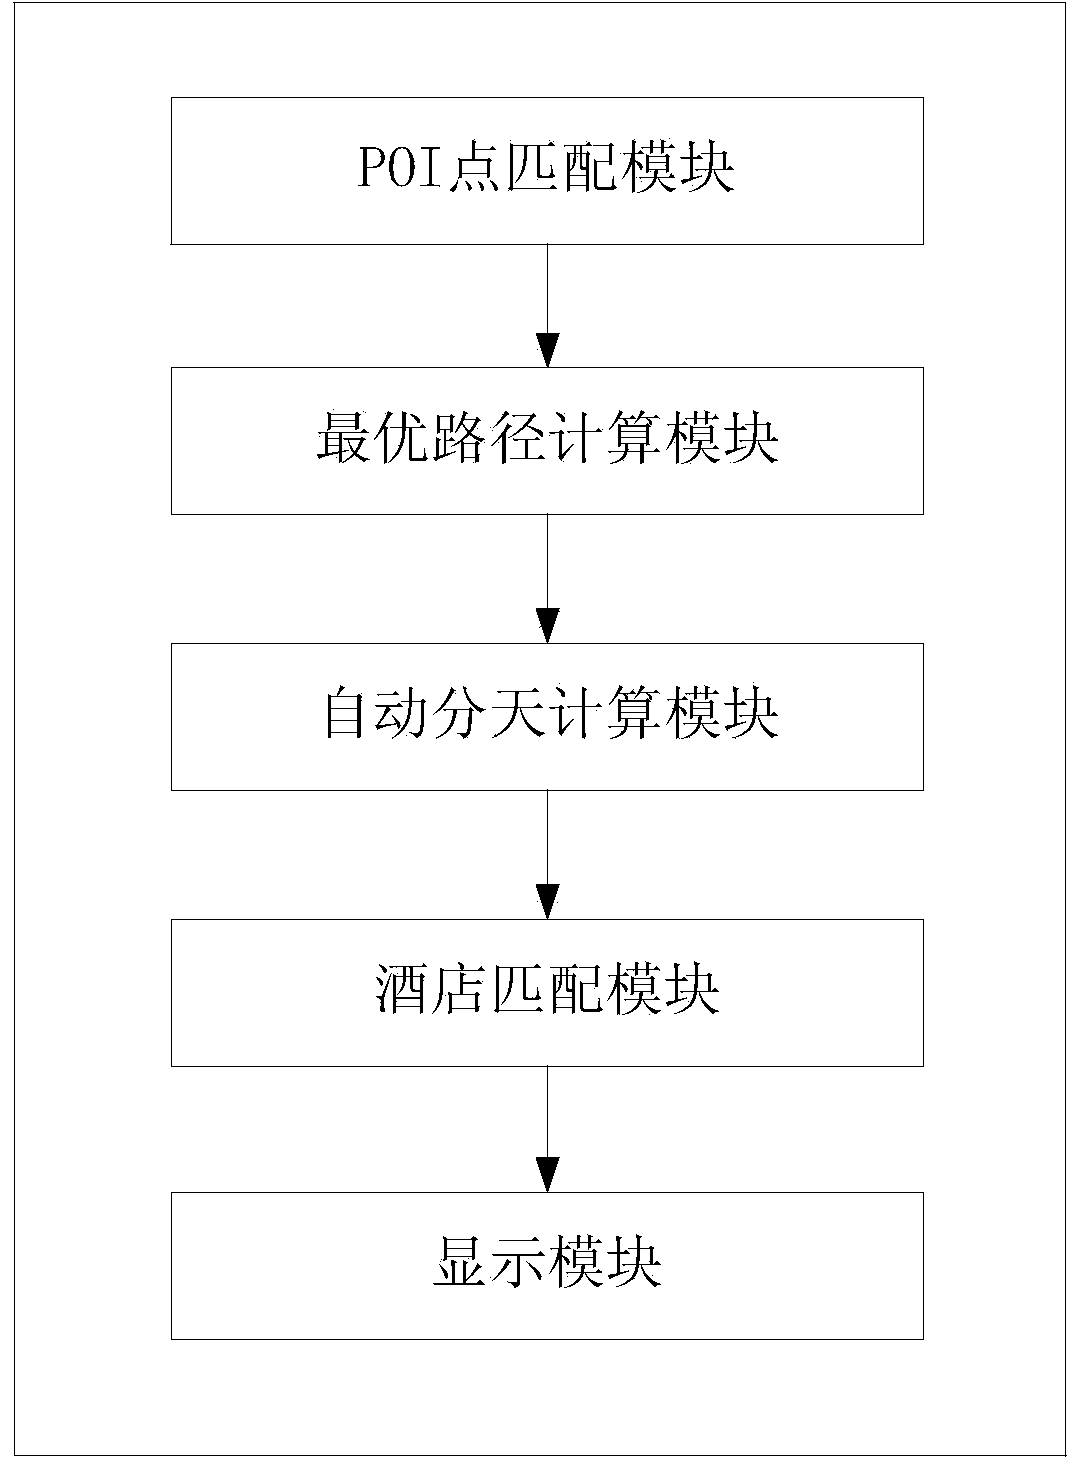 Data analysis-based automatic route programming method and system thereof